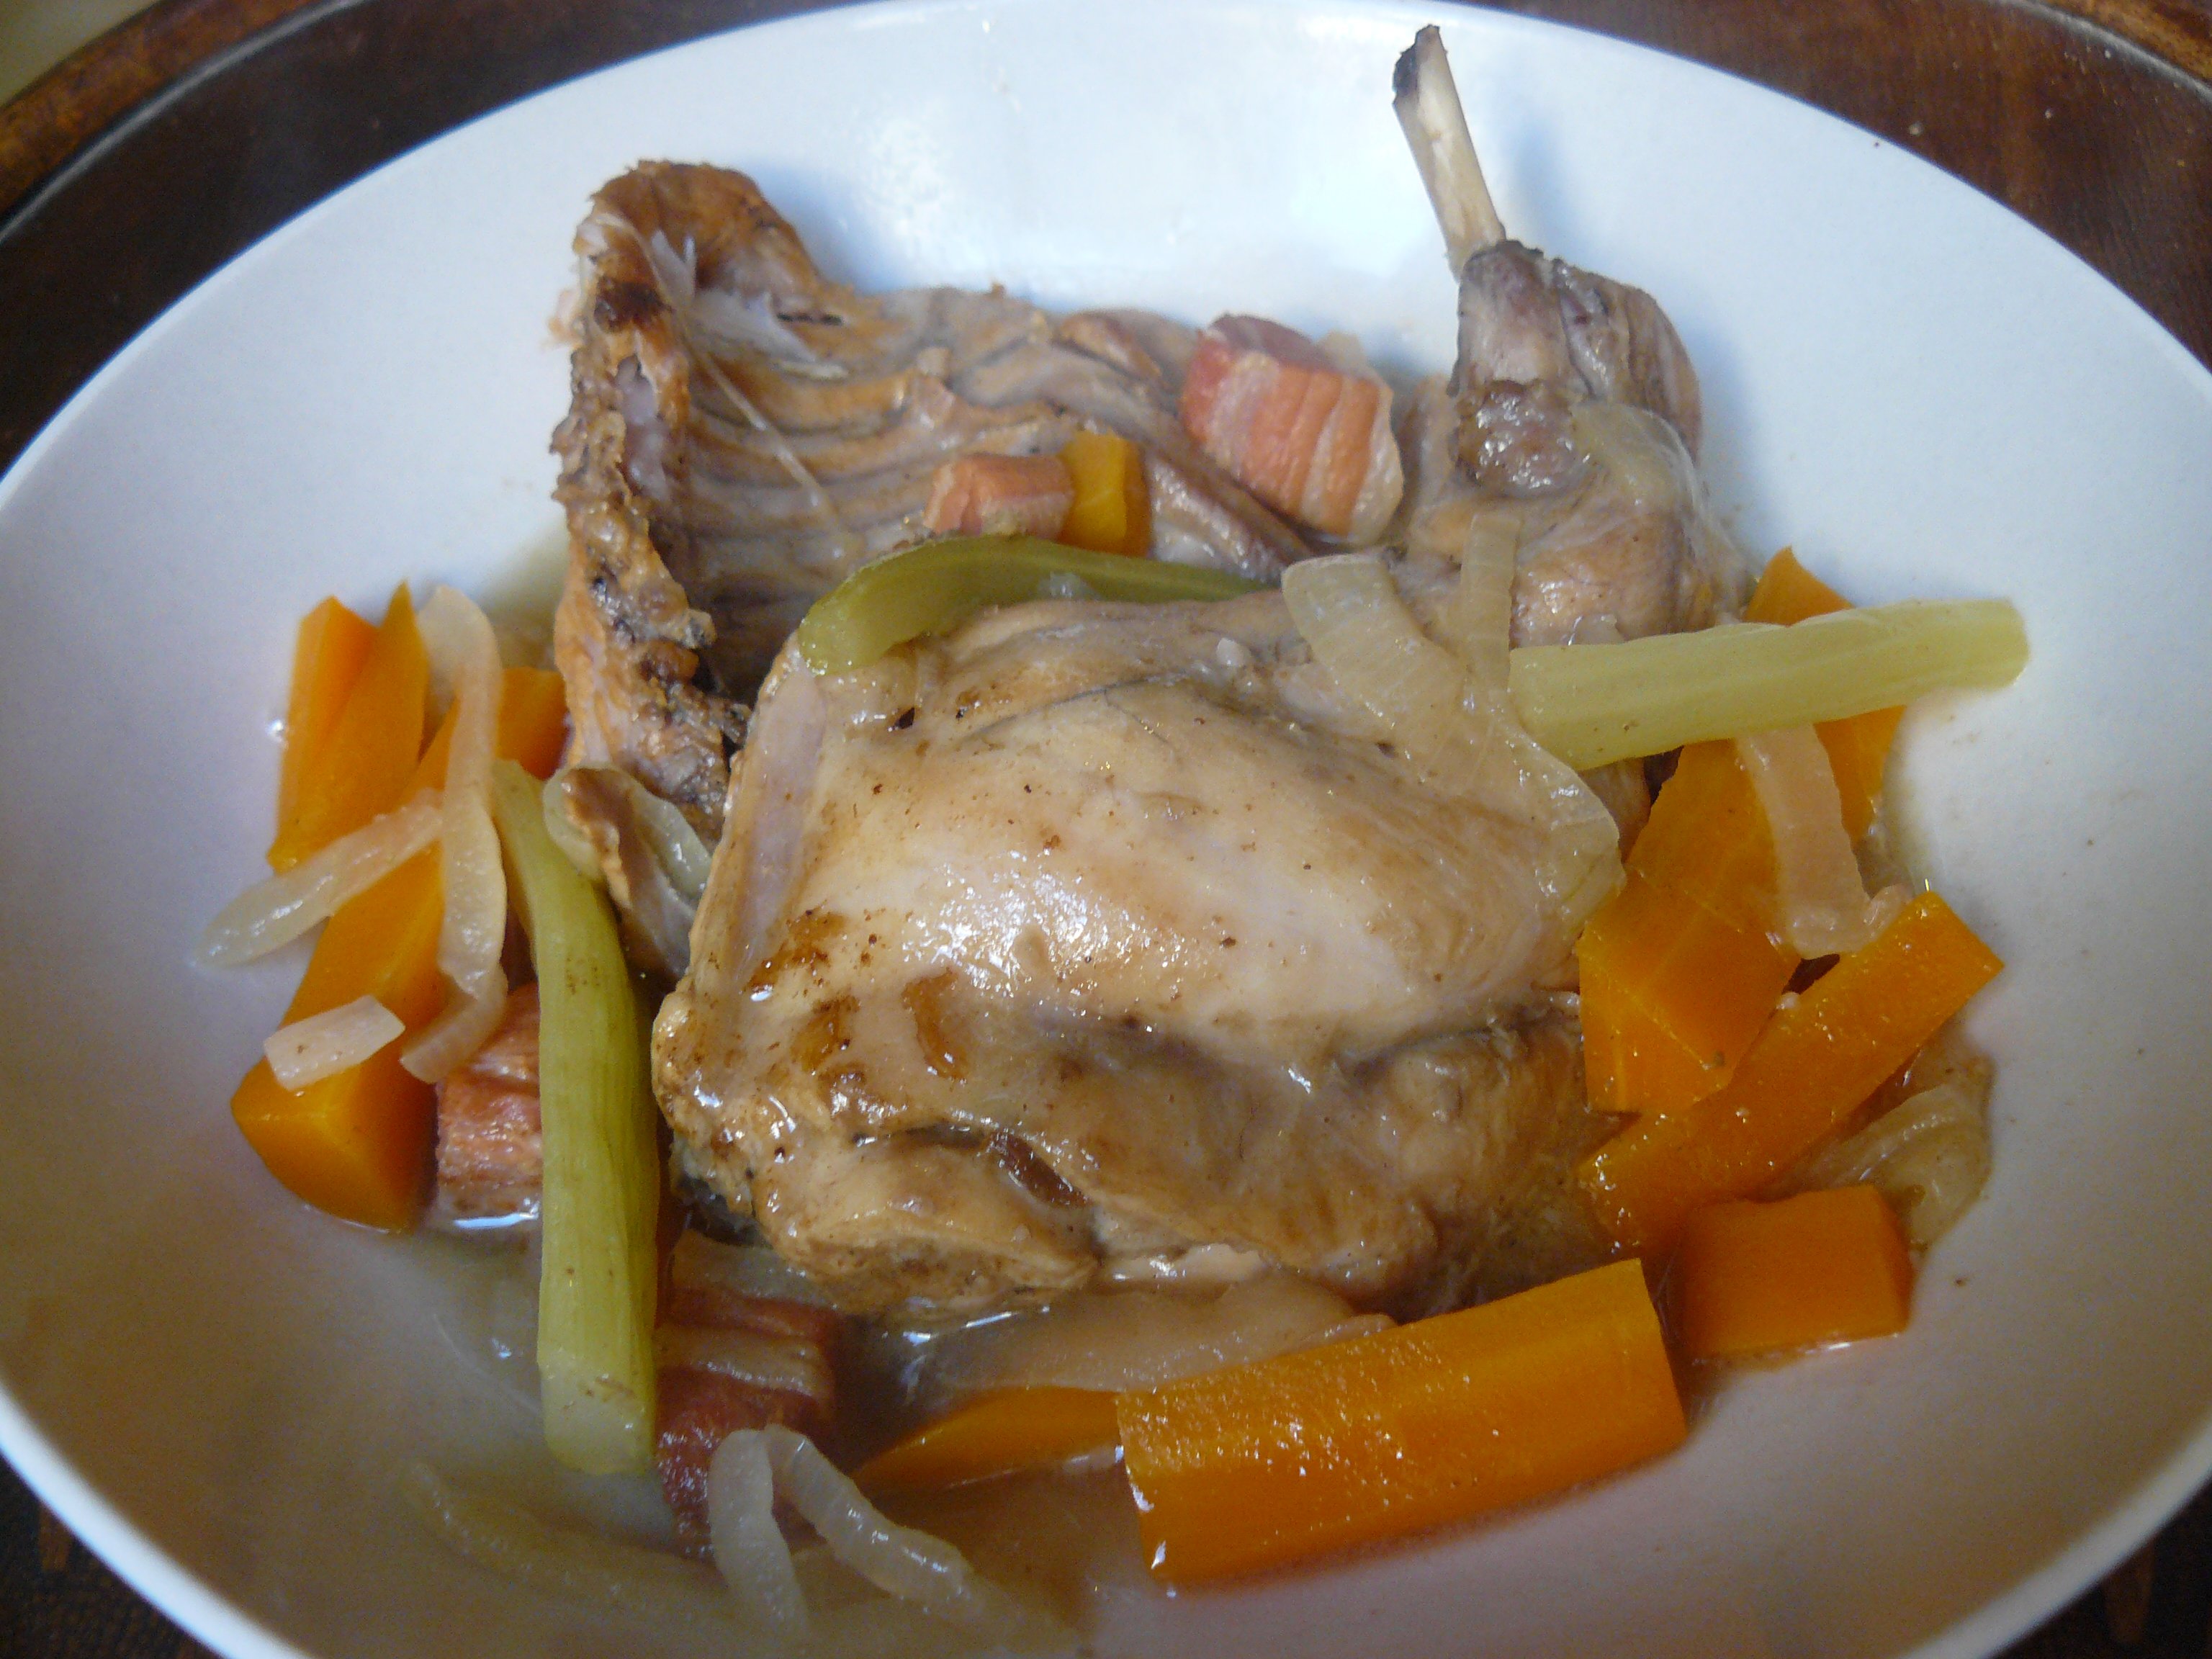 Rural-style hare stewed in marinade